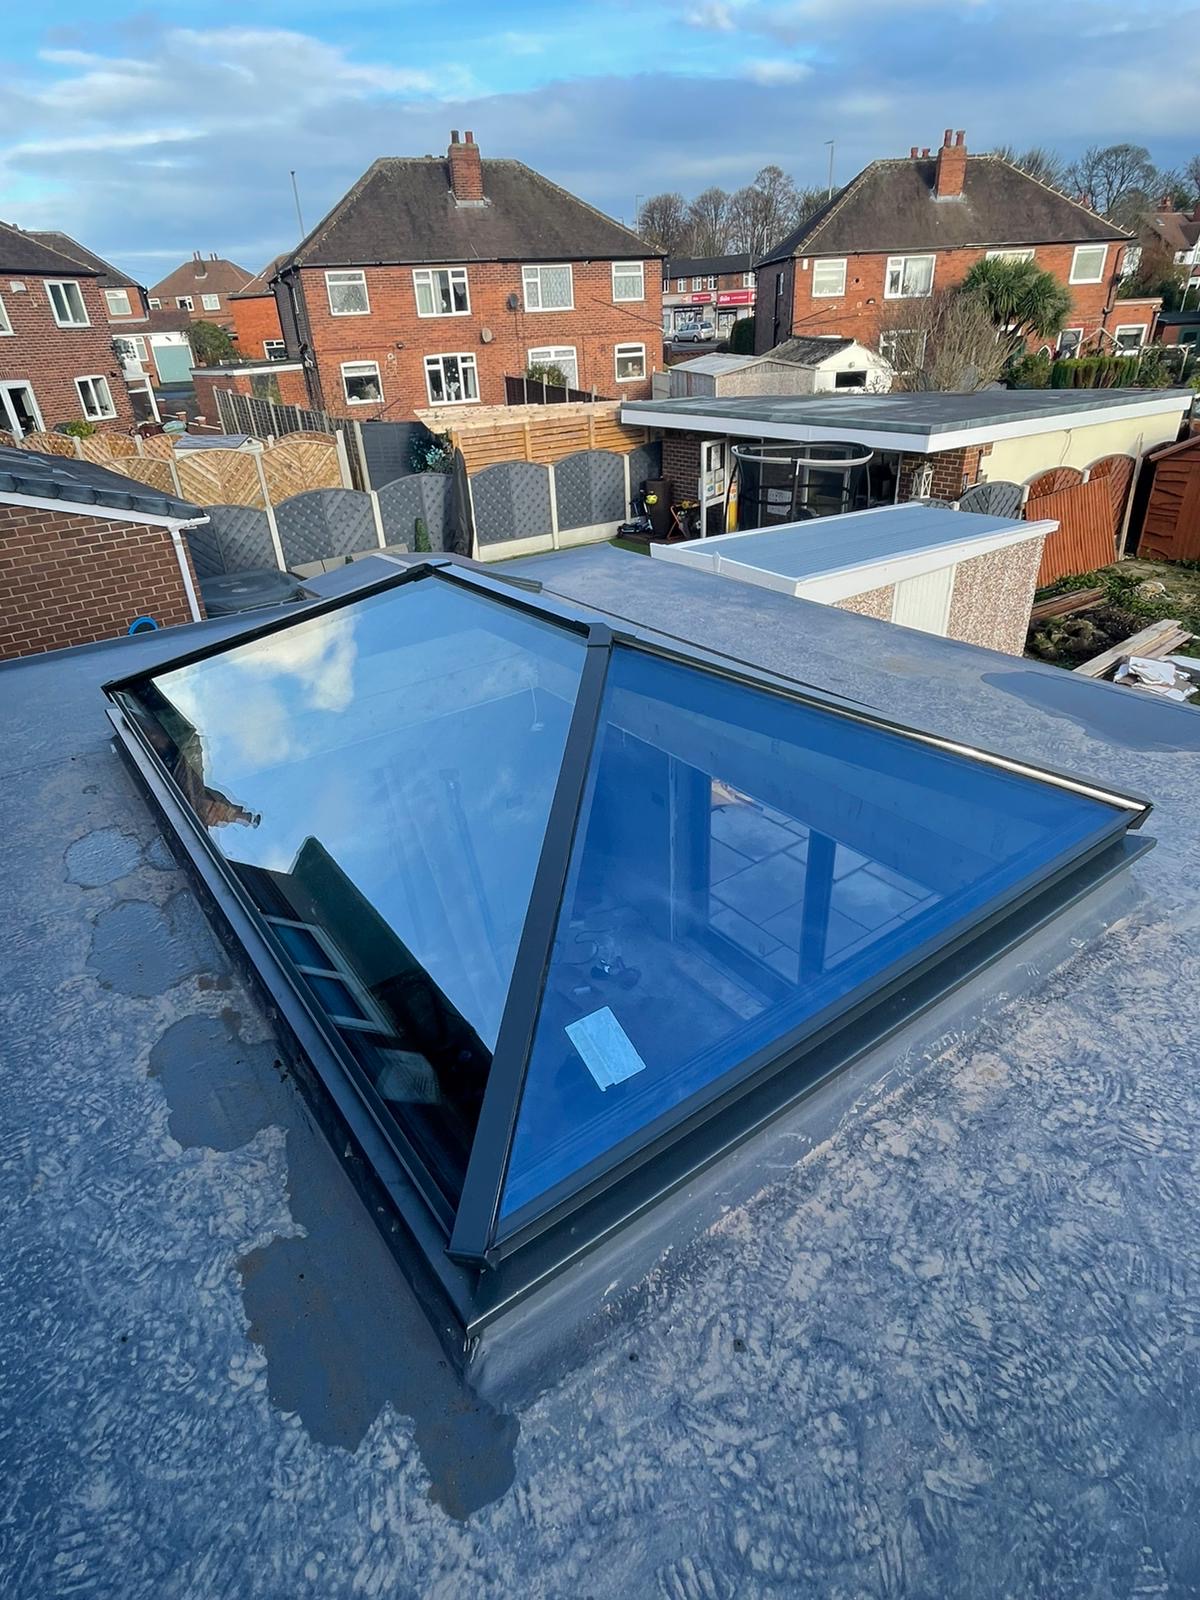 A roof lantern from inside the home